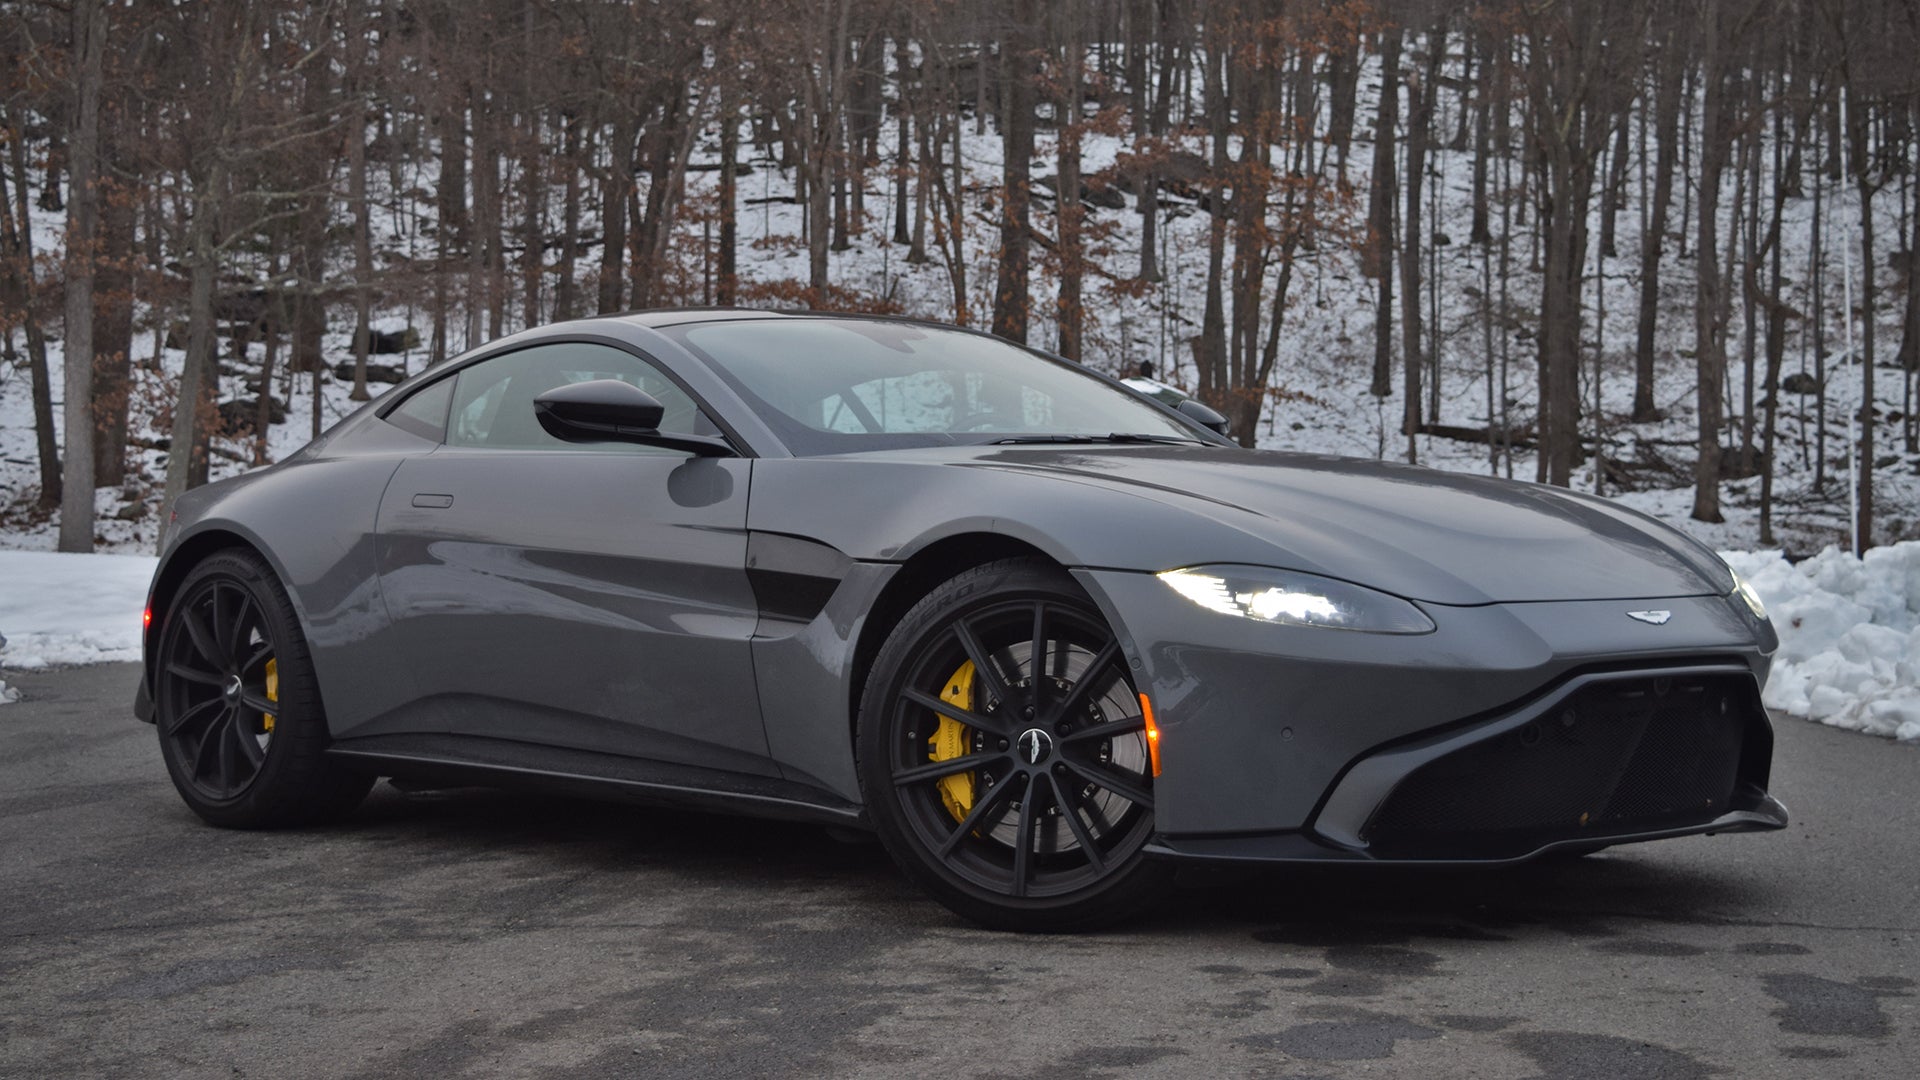 2019 Aston Martin Vantage Review: A Less Traditional Aston, and Way Better for It